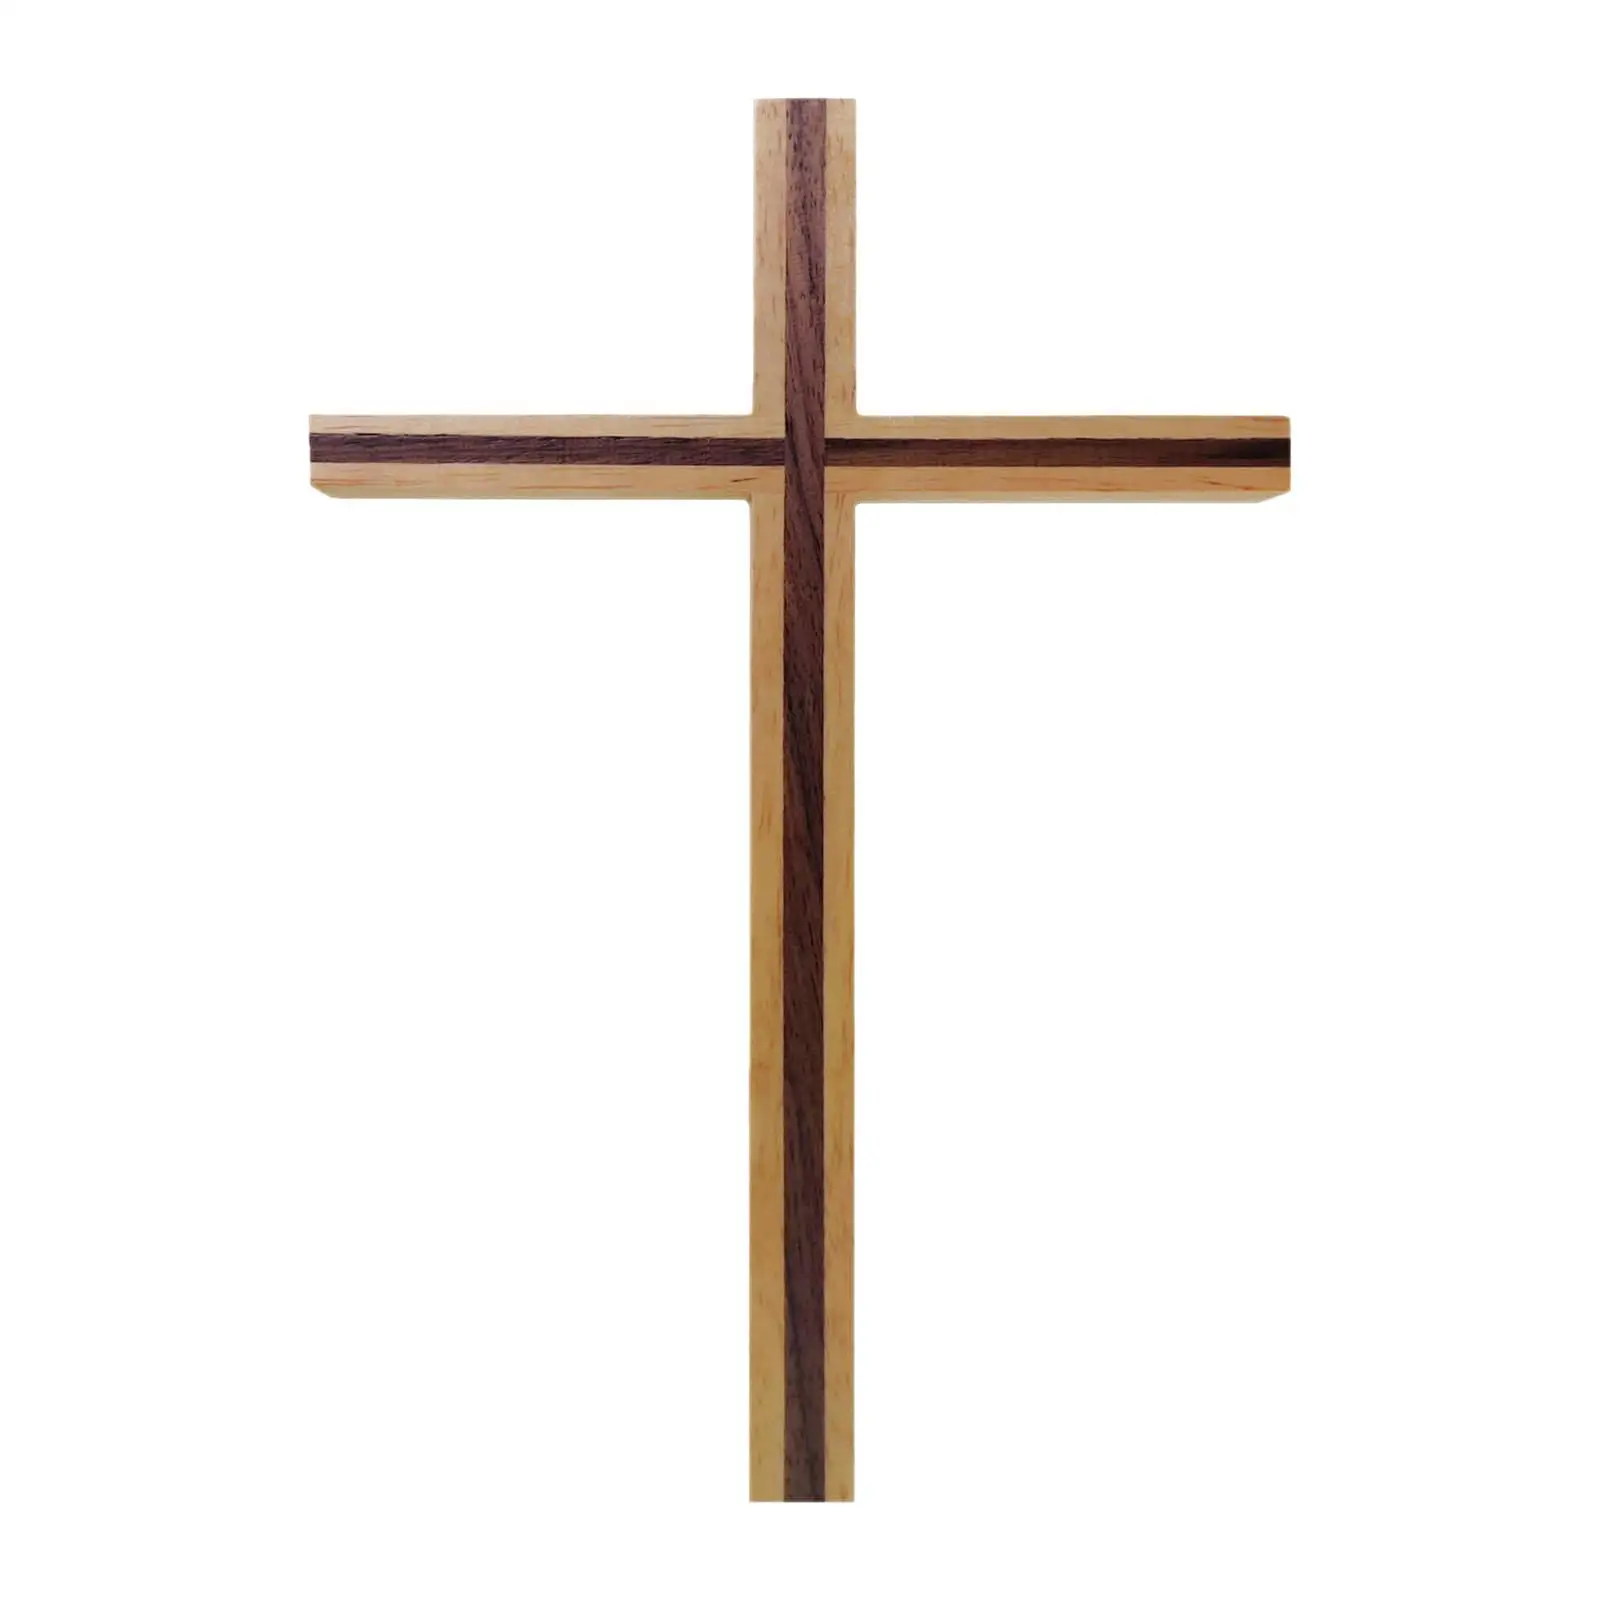 Wood Cross Jesus Collectible Prayer Christian Religious Wall Hanging Crucifix Statue